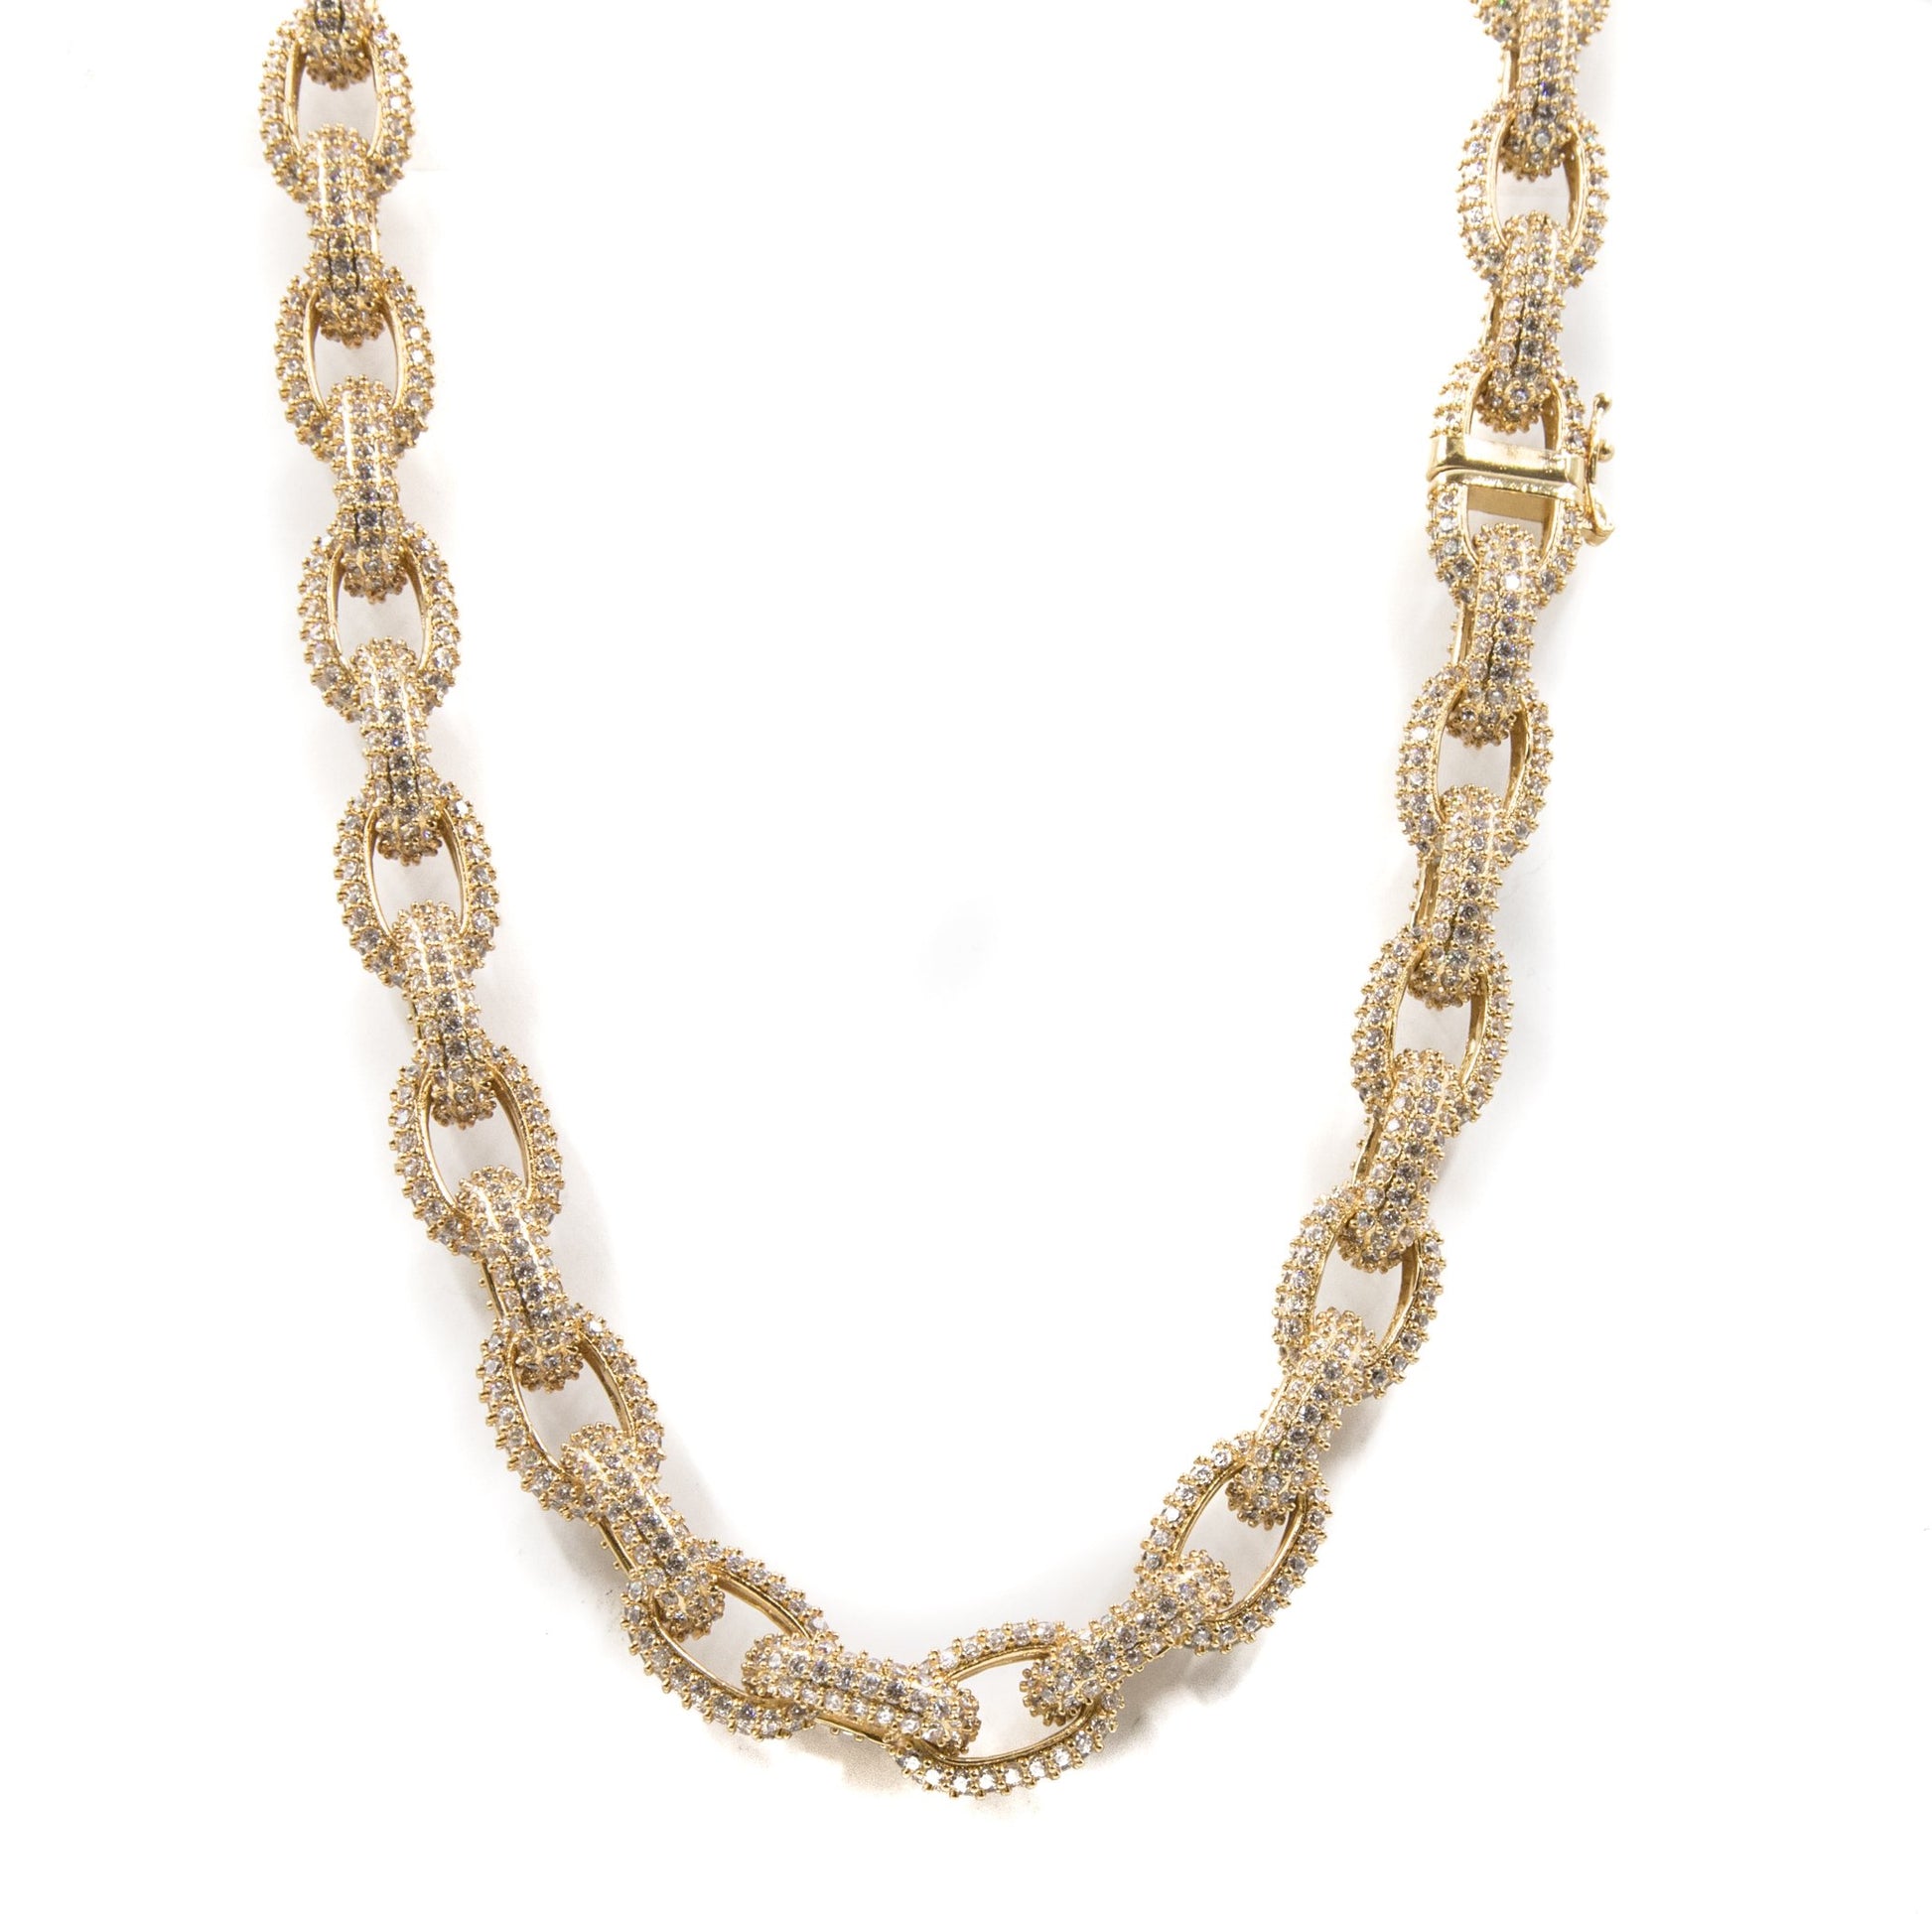 Studded Chain Link Rolo Choker Necklace - 18K Gold Plated - GOLDEN GILT